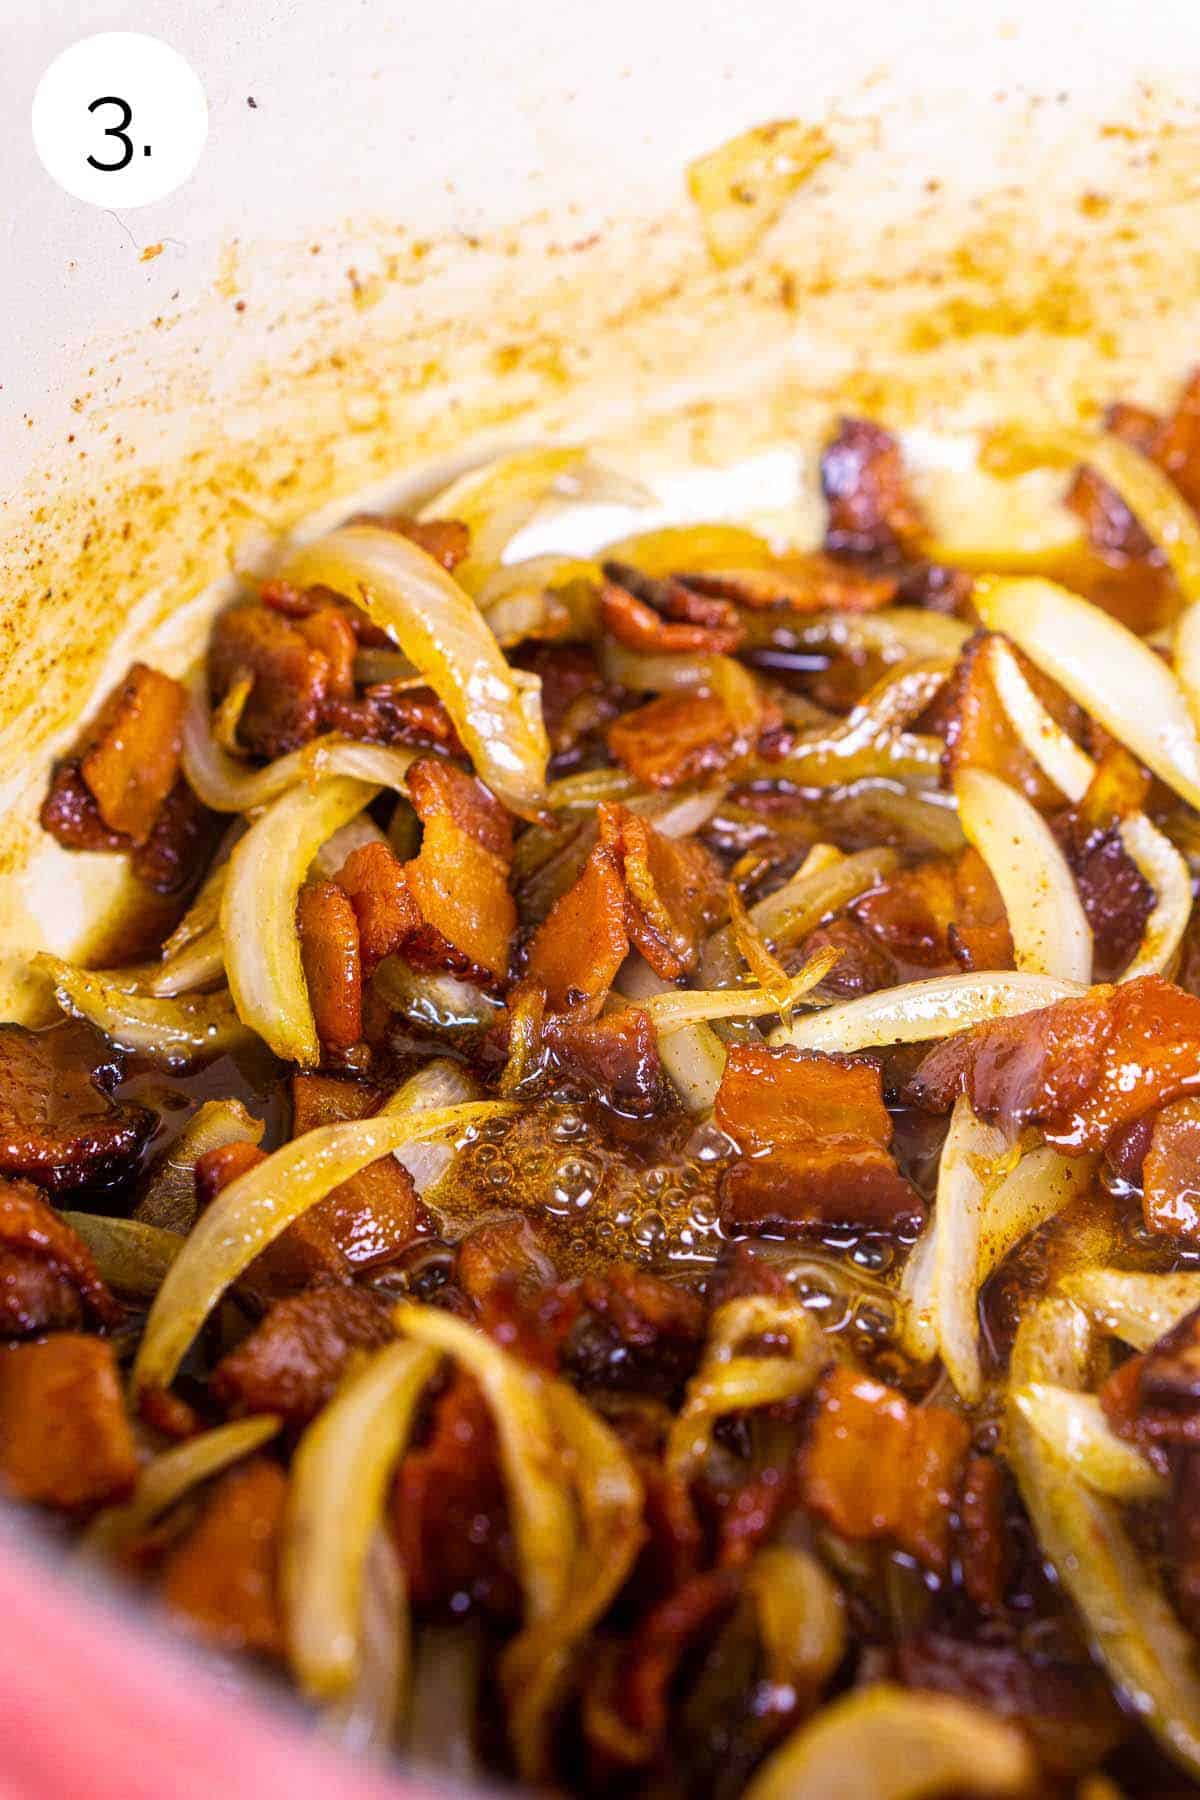 The bacon and caramelized onions with the liquid ingredients added to a large red Dutch oven on the stove.